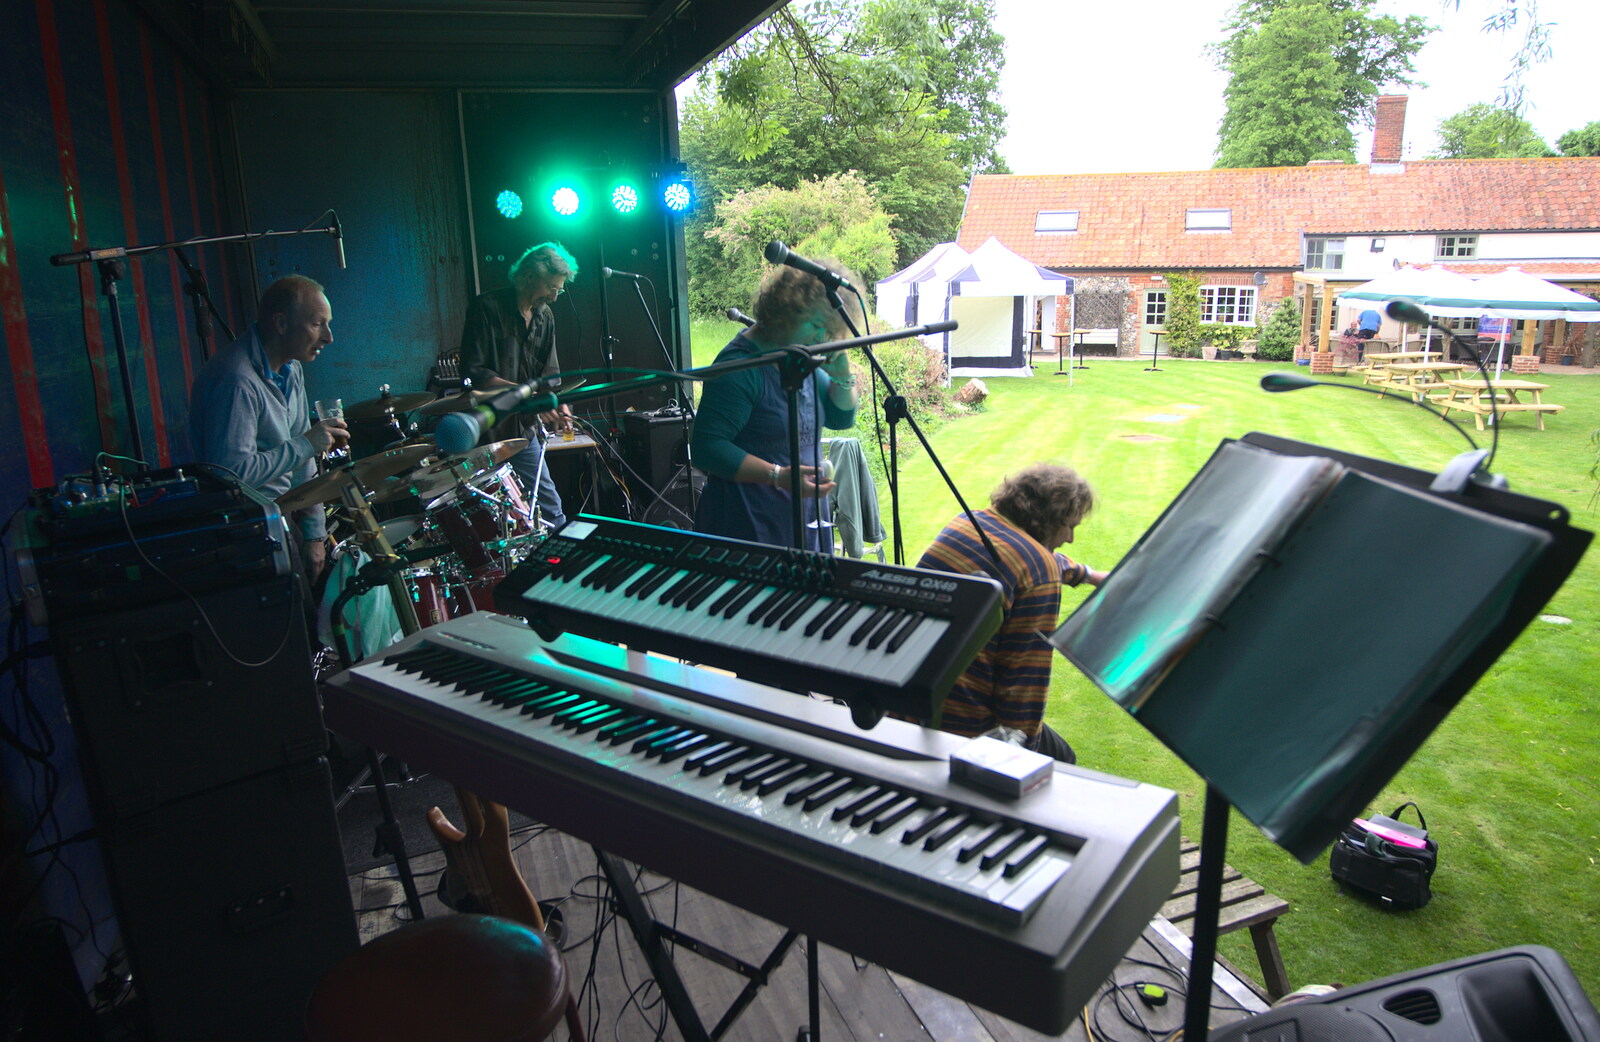 The BBs at the White Hart, Roydon, Norfolk - 1st June 2012: The view from Nosher's keyboards